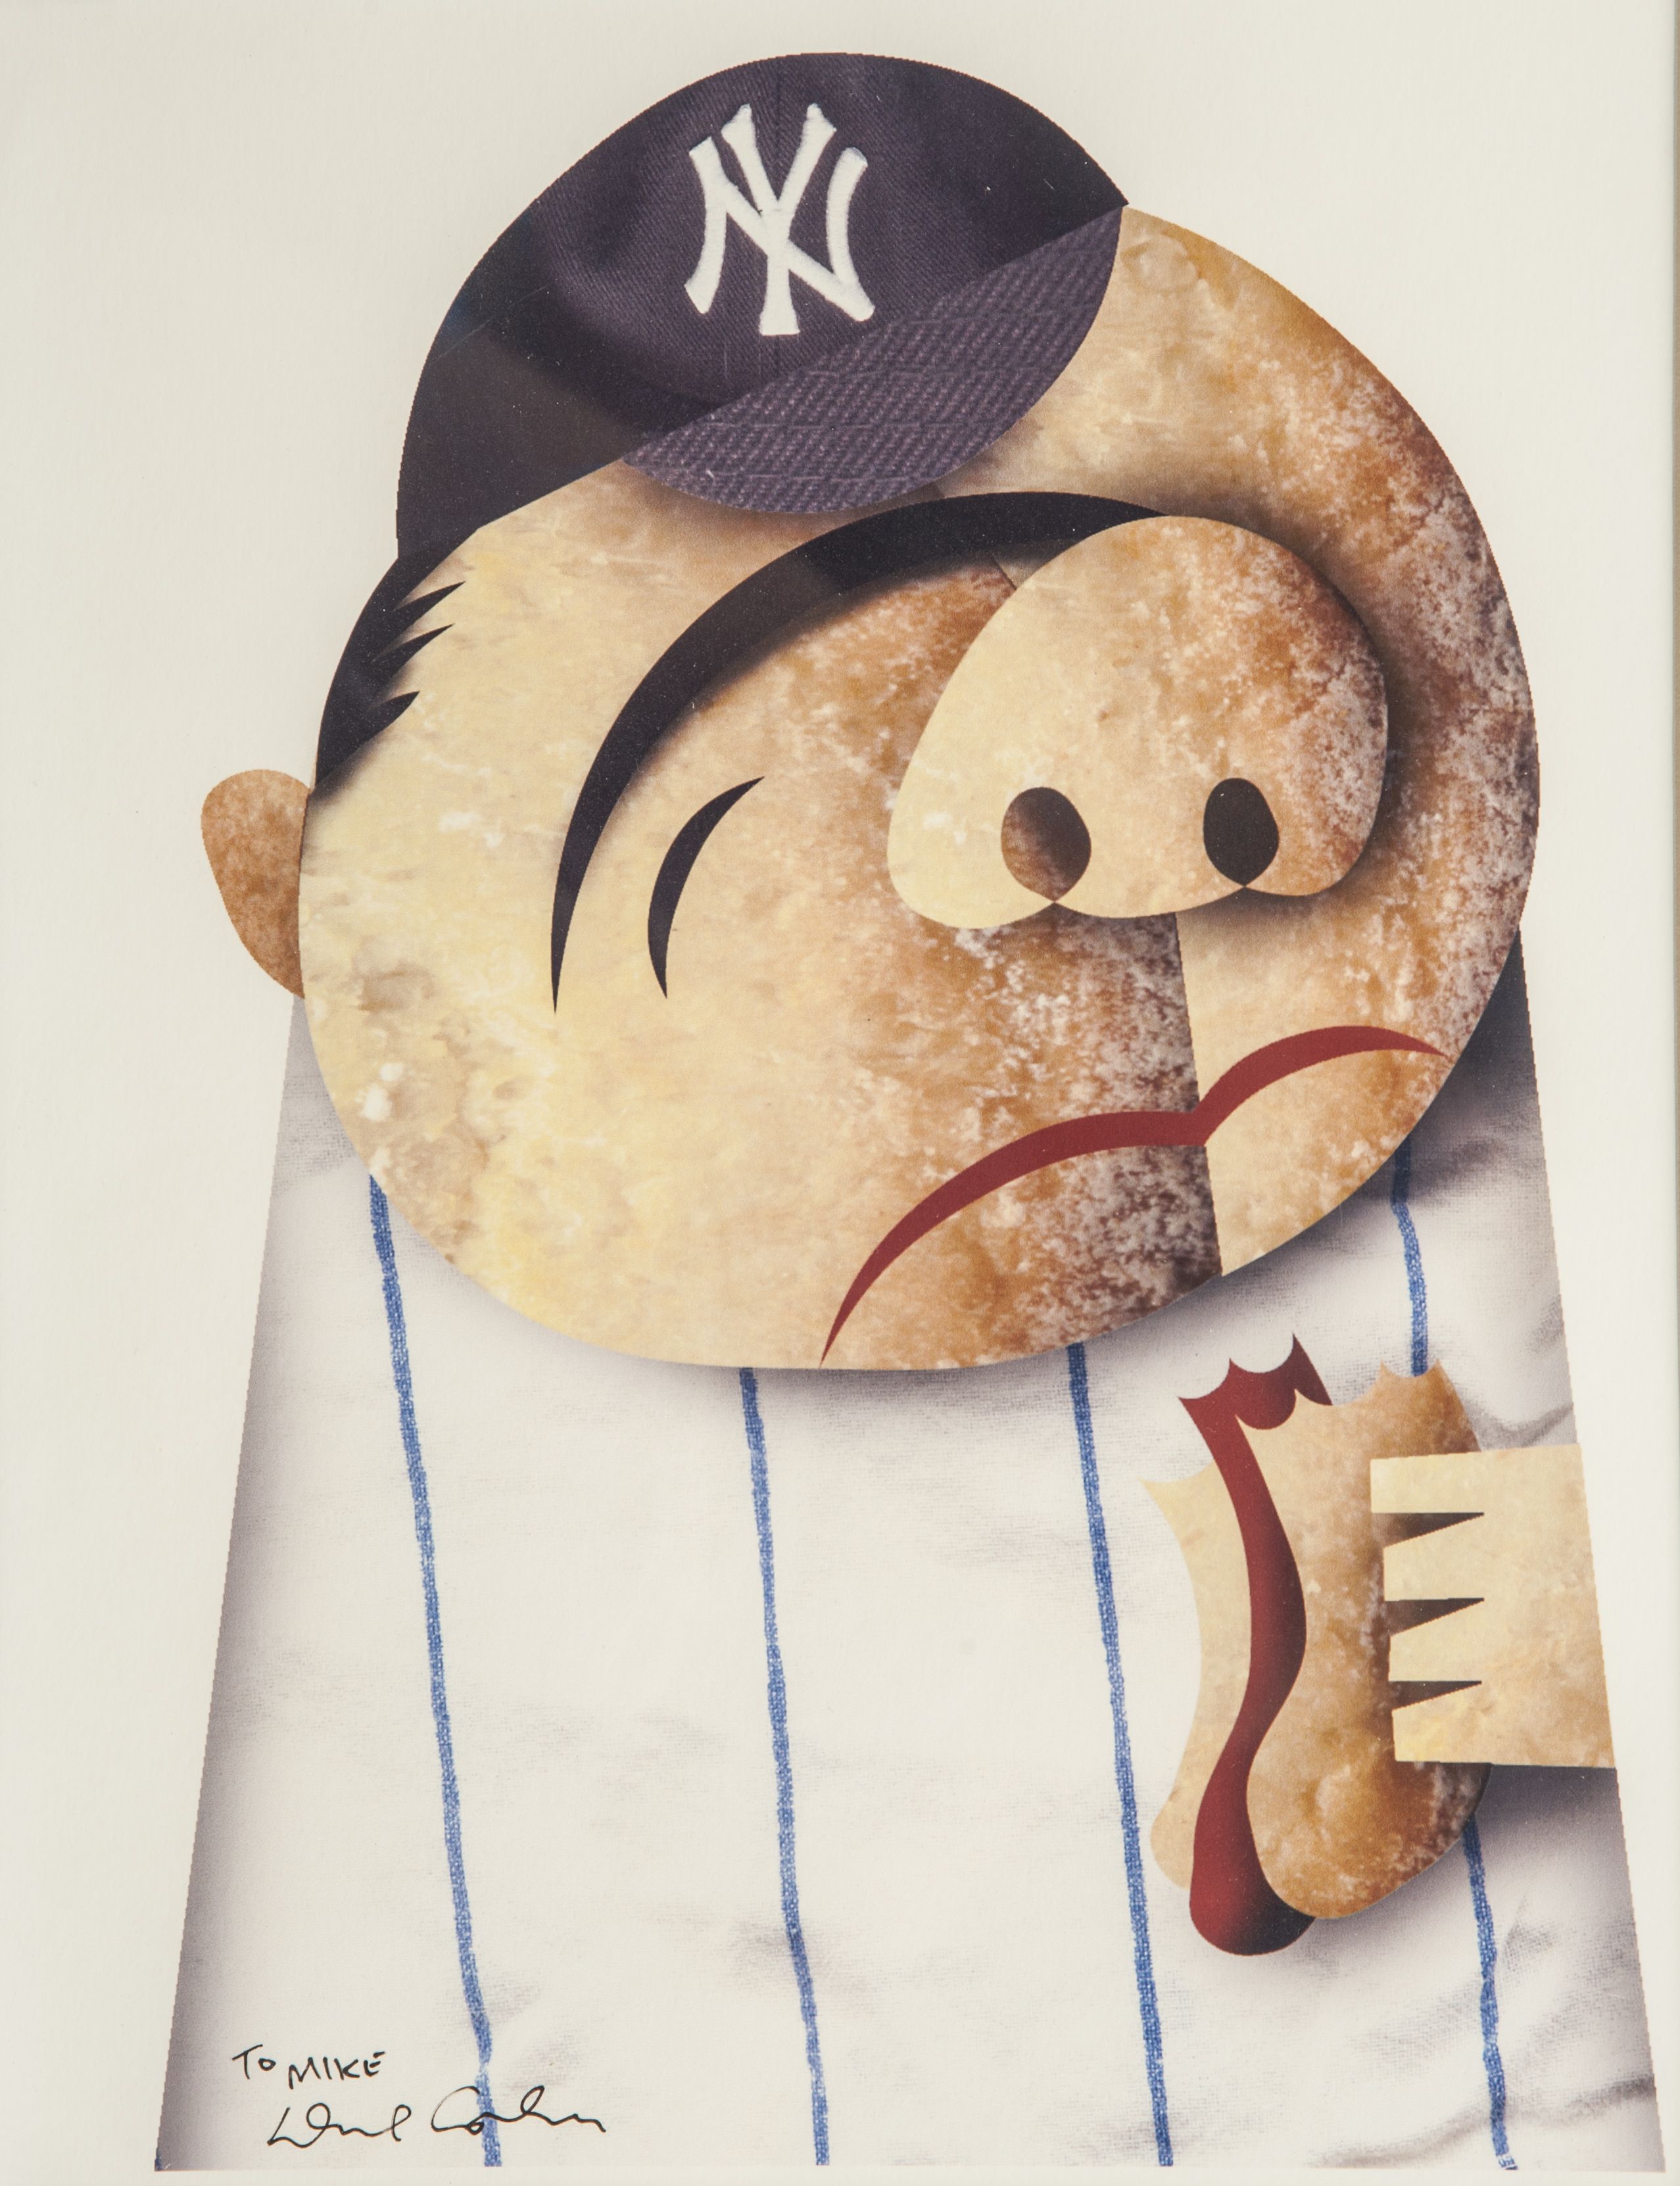 Lot Detail - Illustration of Babe Ruth by Izra Cohen